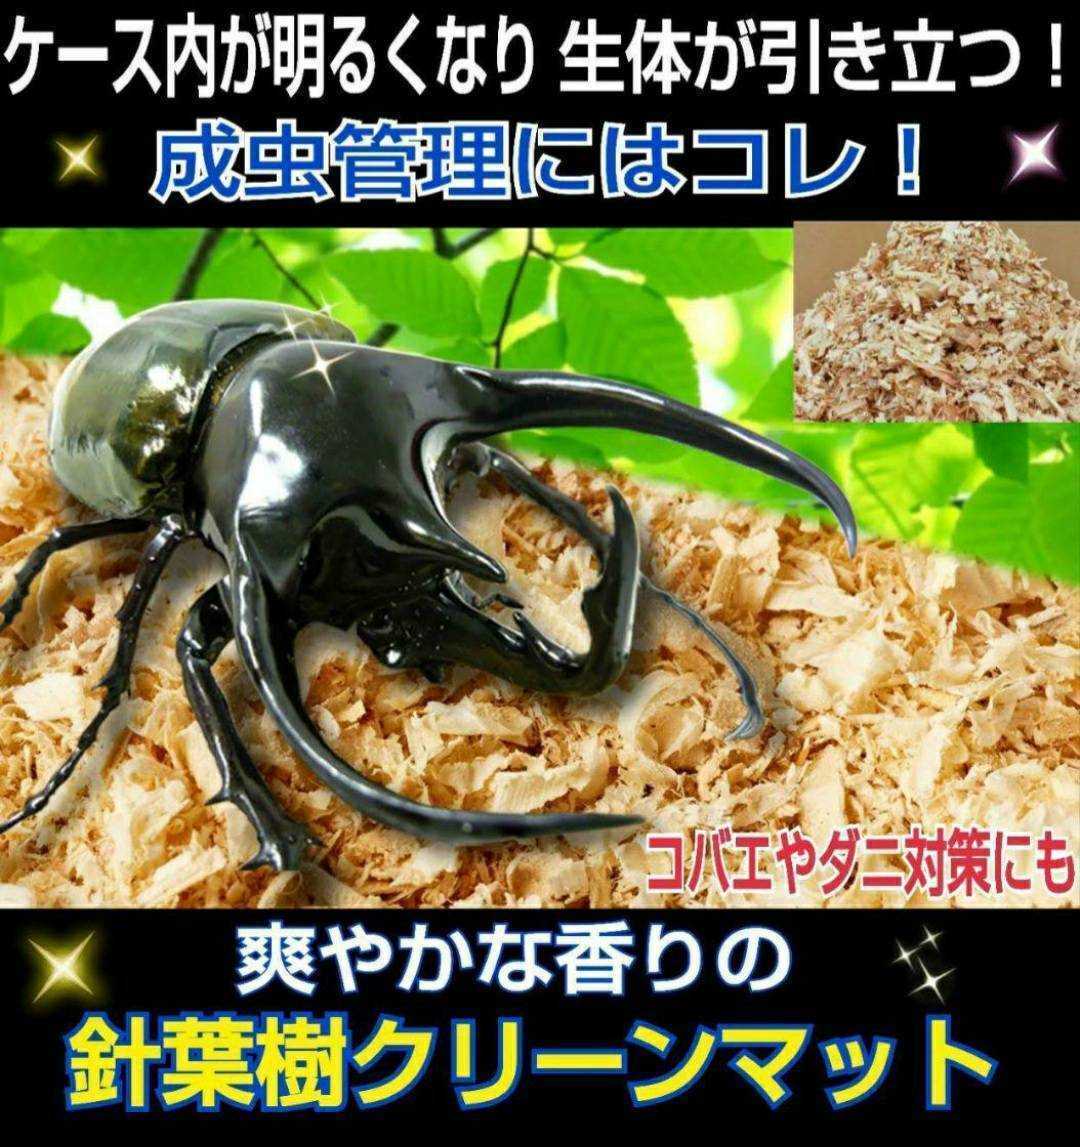  stag beetle, rhinoceros beetle. imago breeding is kore! refreshing . fragrance. needle leaved tree clean mat case inside . bright becomes organism . cool well is seen! mites prevention also 